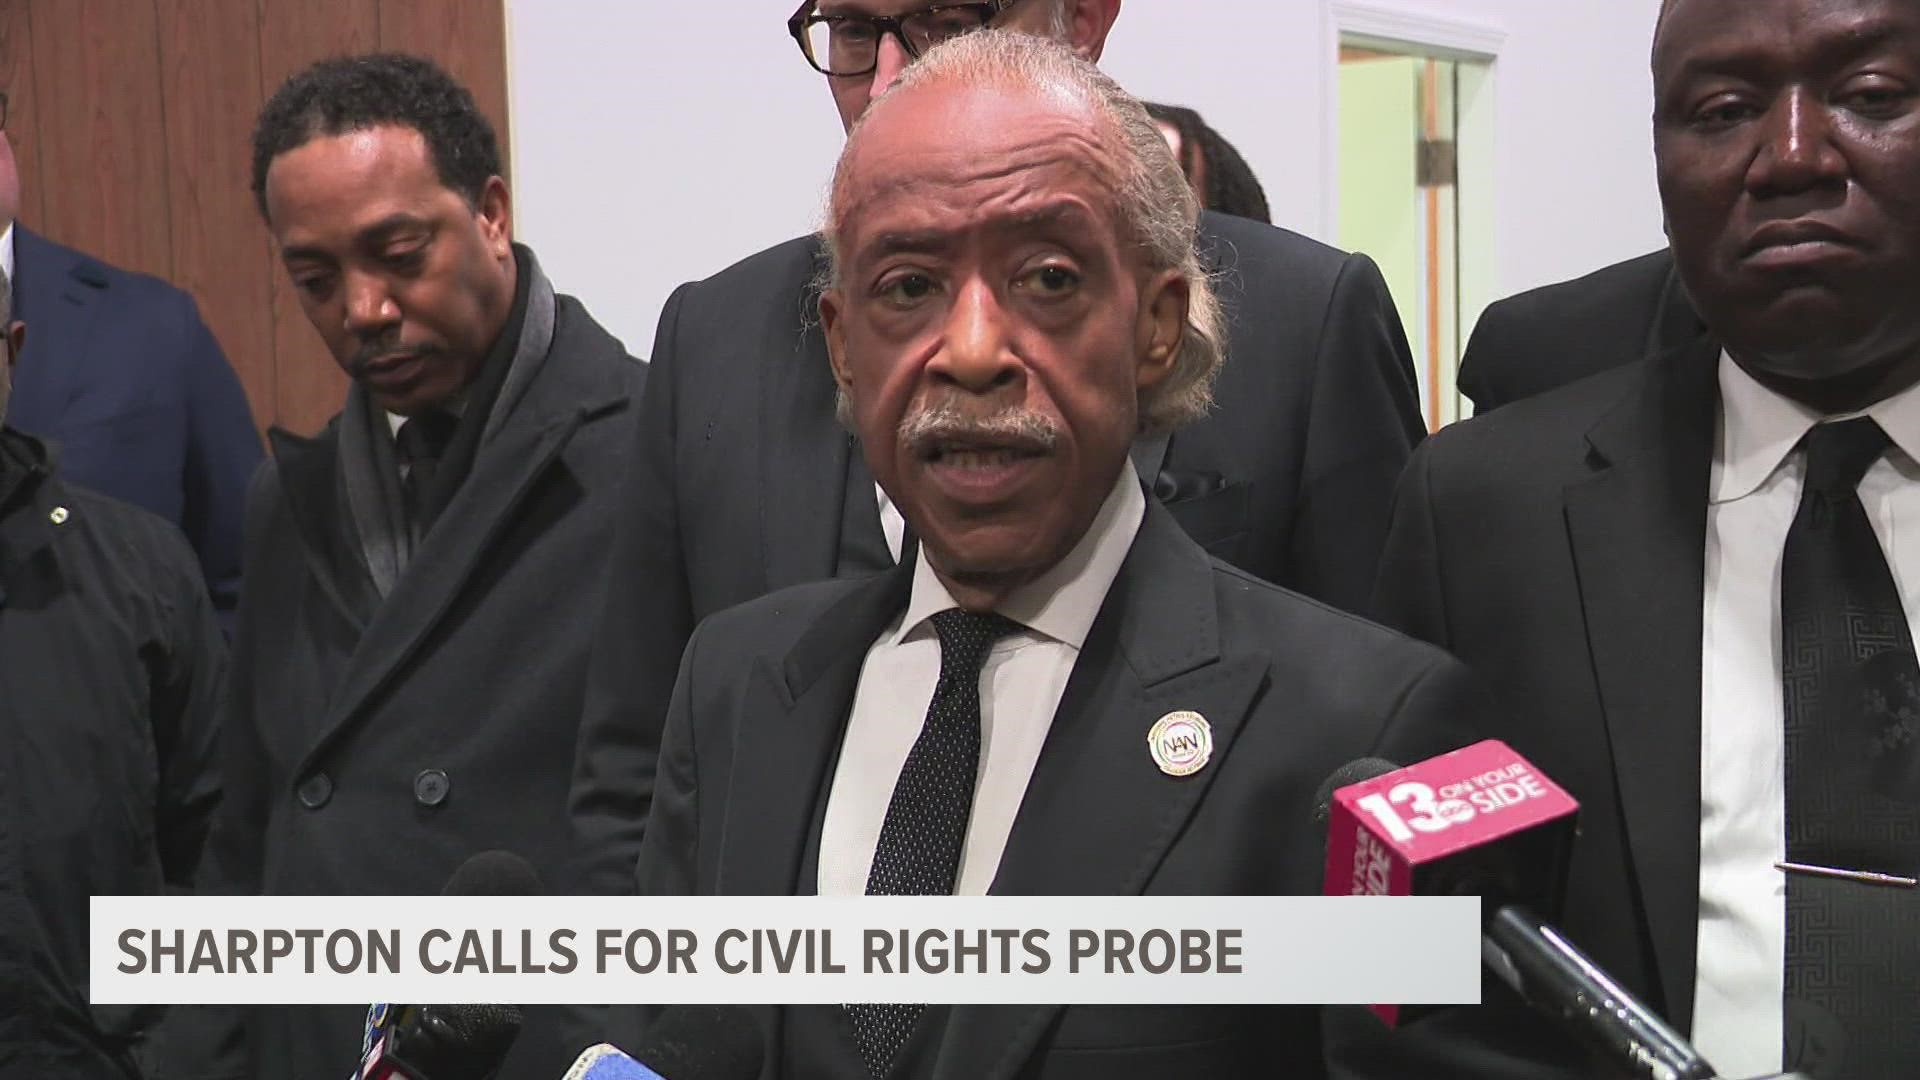 Rev. Sharpton spoke with the media before and after the Lyoya funeral, demanding the officers name be released.